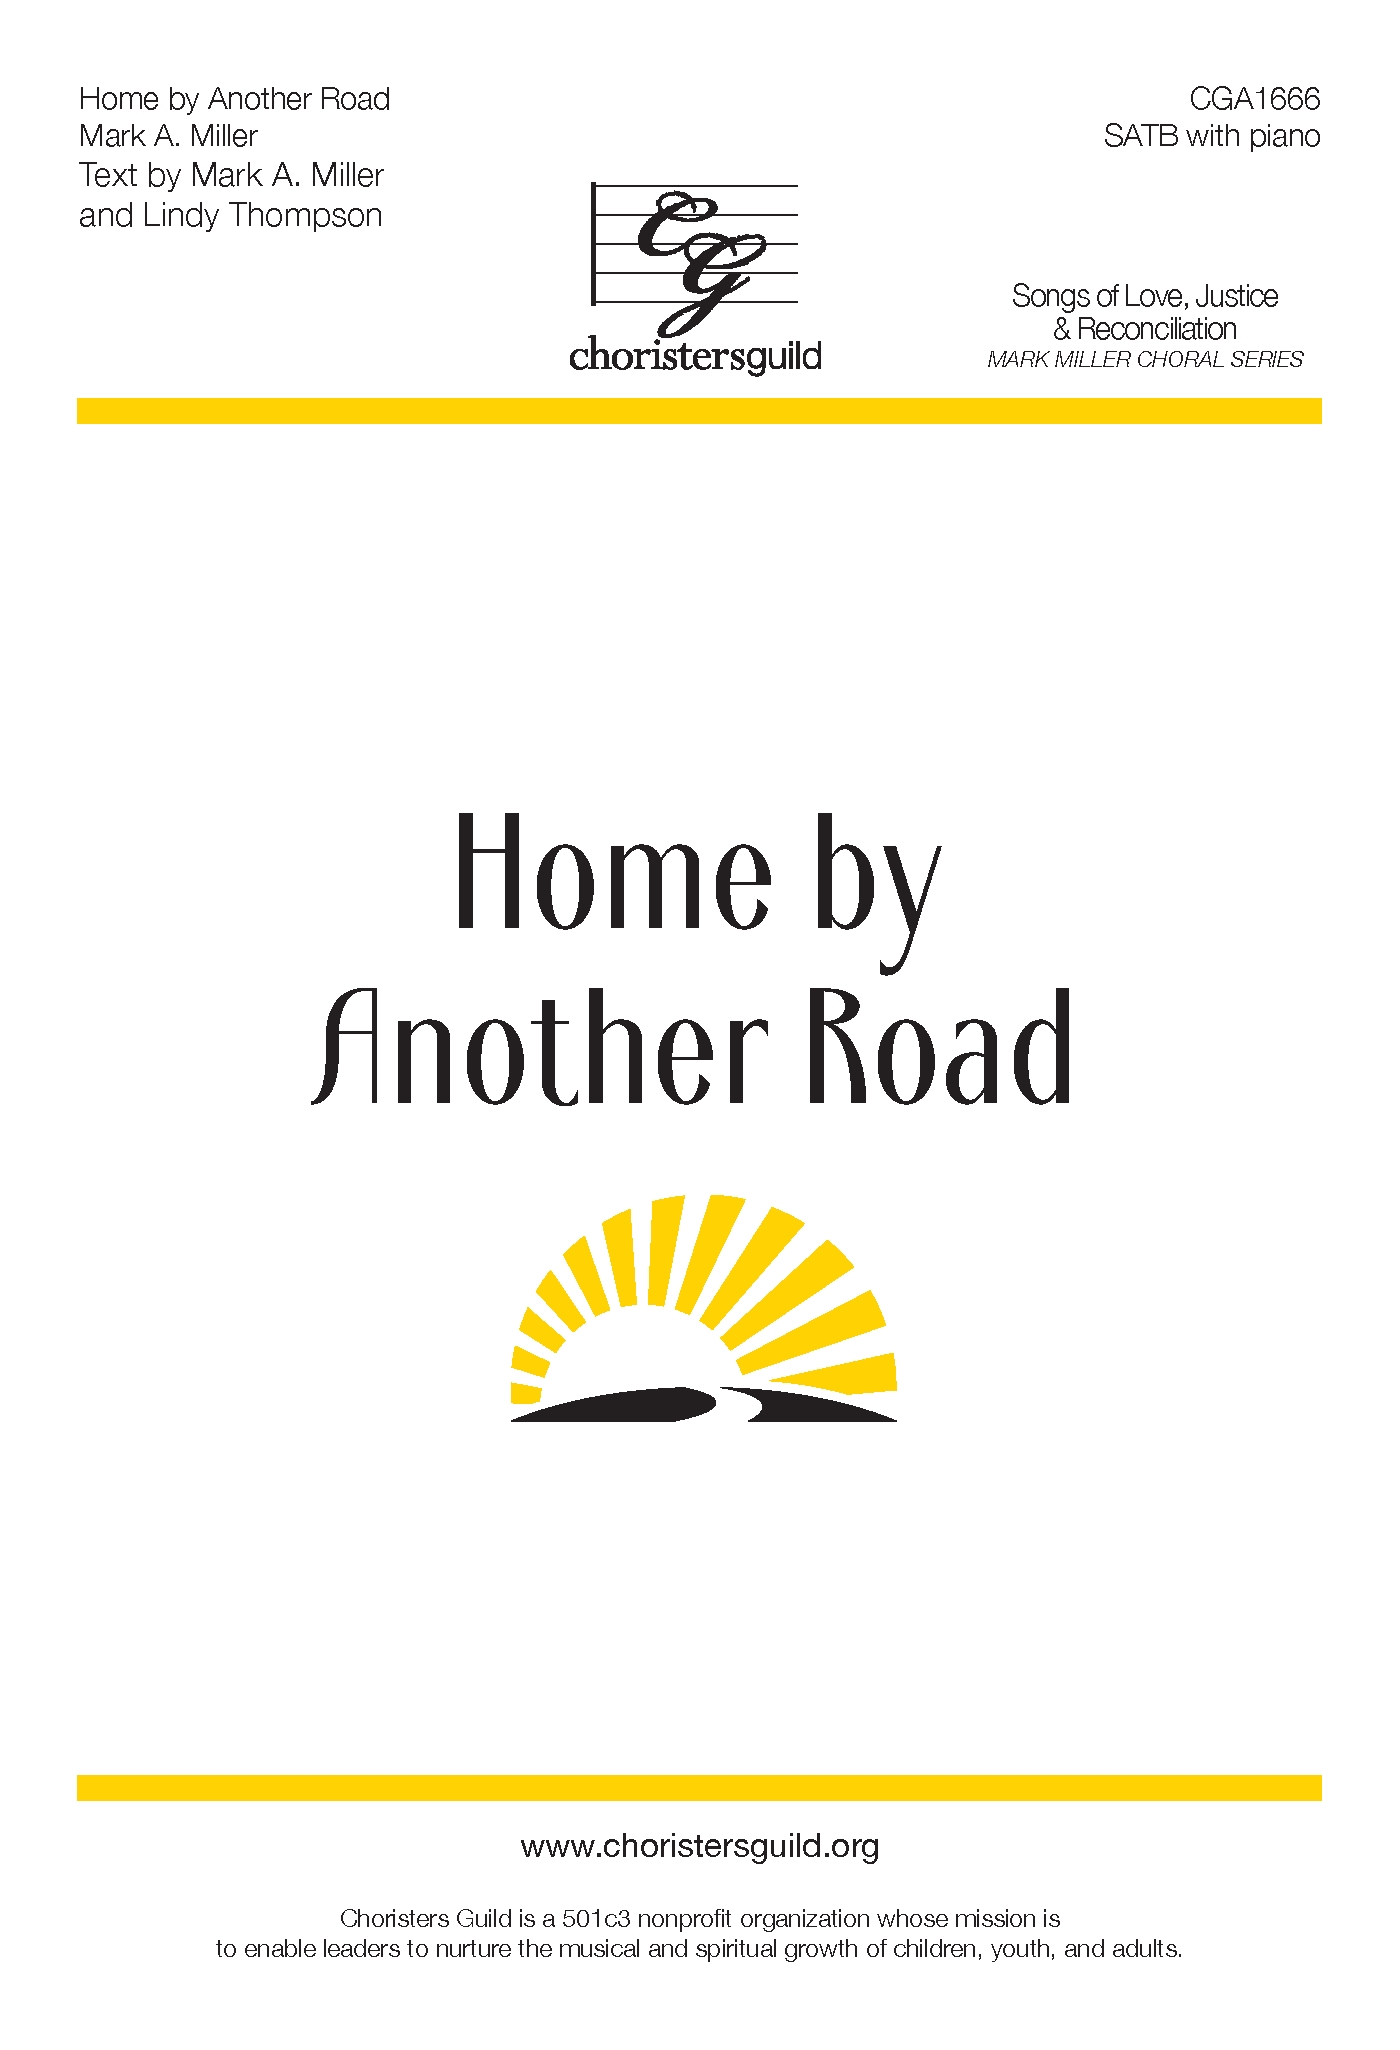 Home By Another Road - SATB